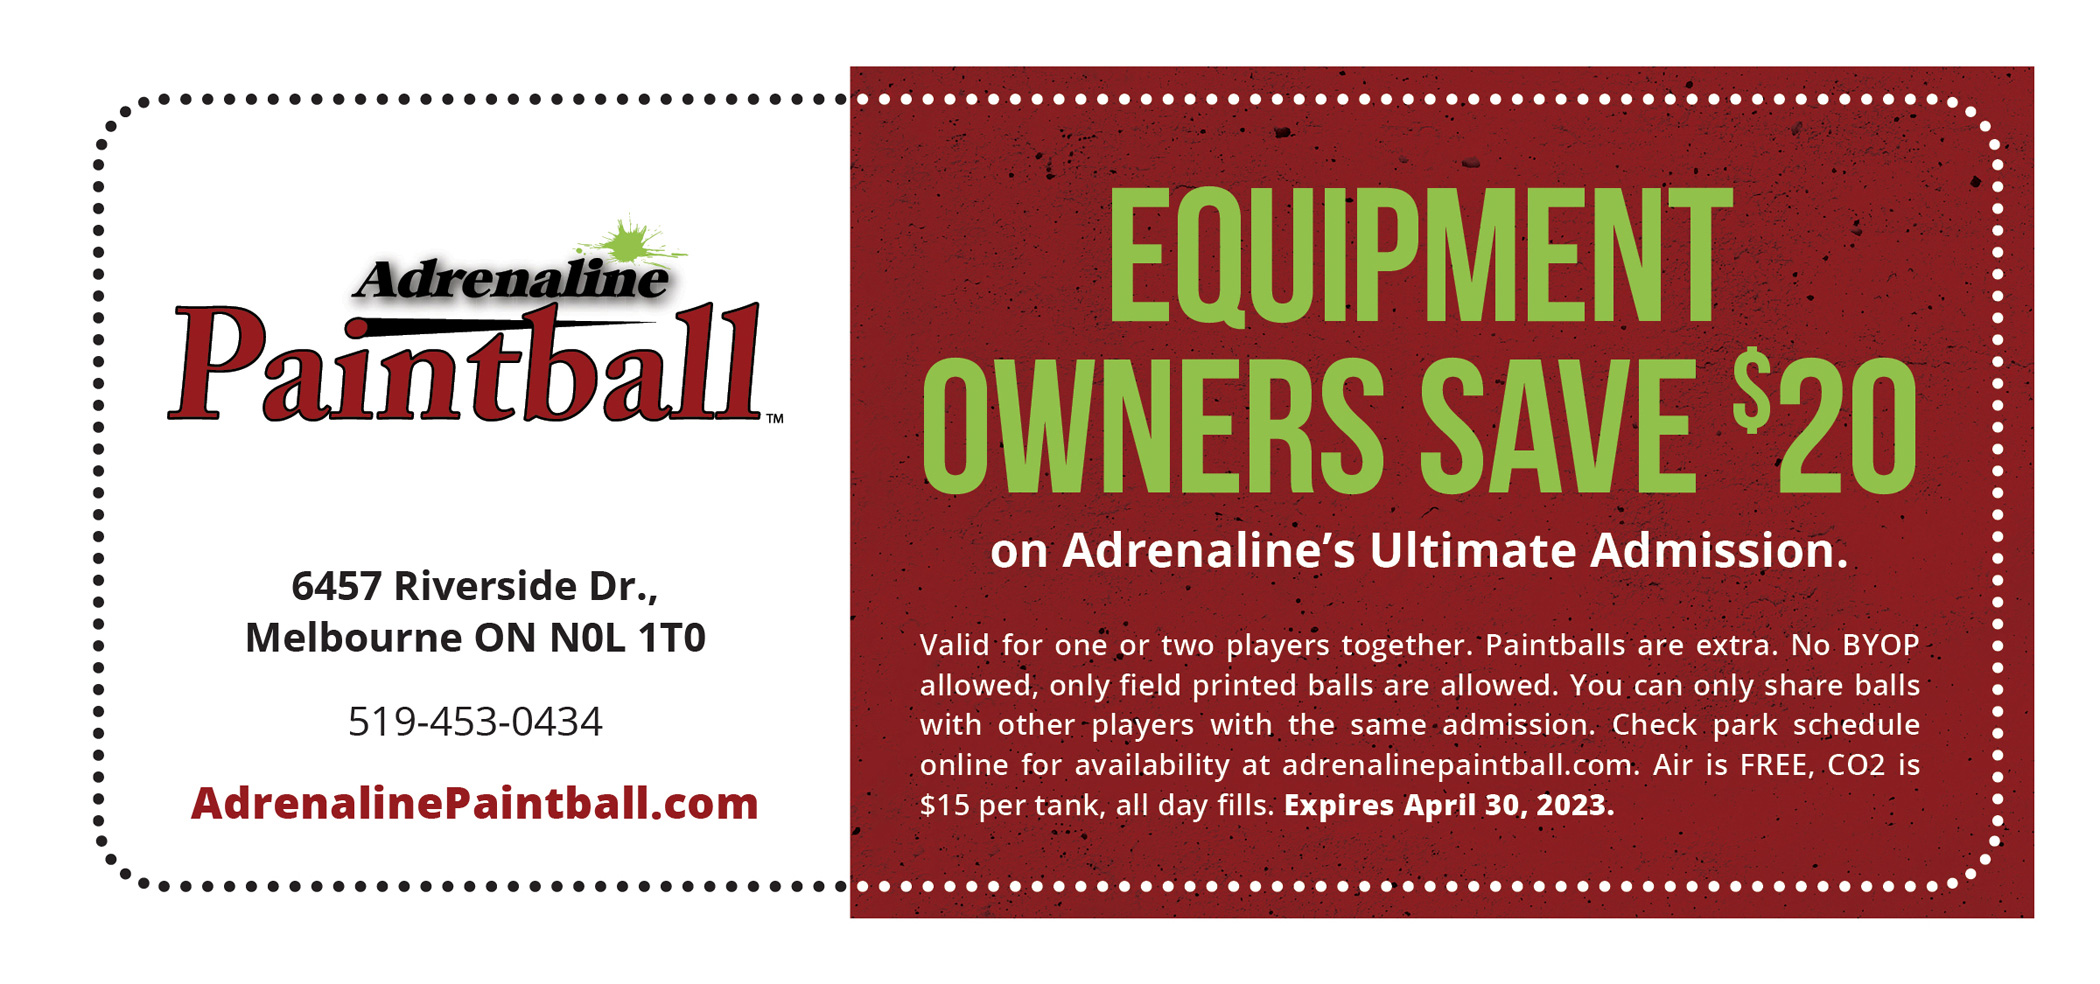 Equipment owners save $20 on Adrenaline’s Ultimate Admission